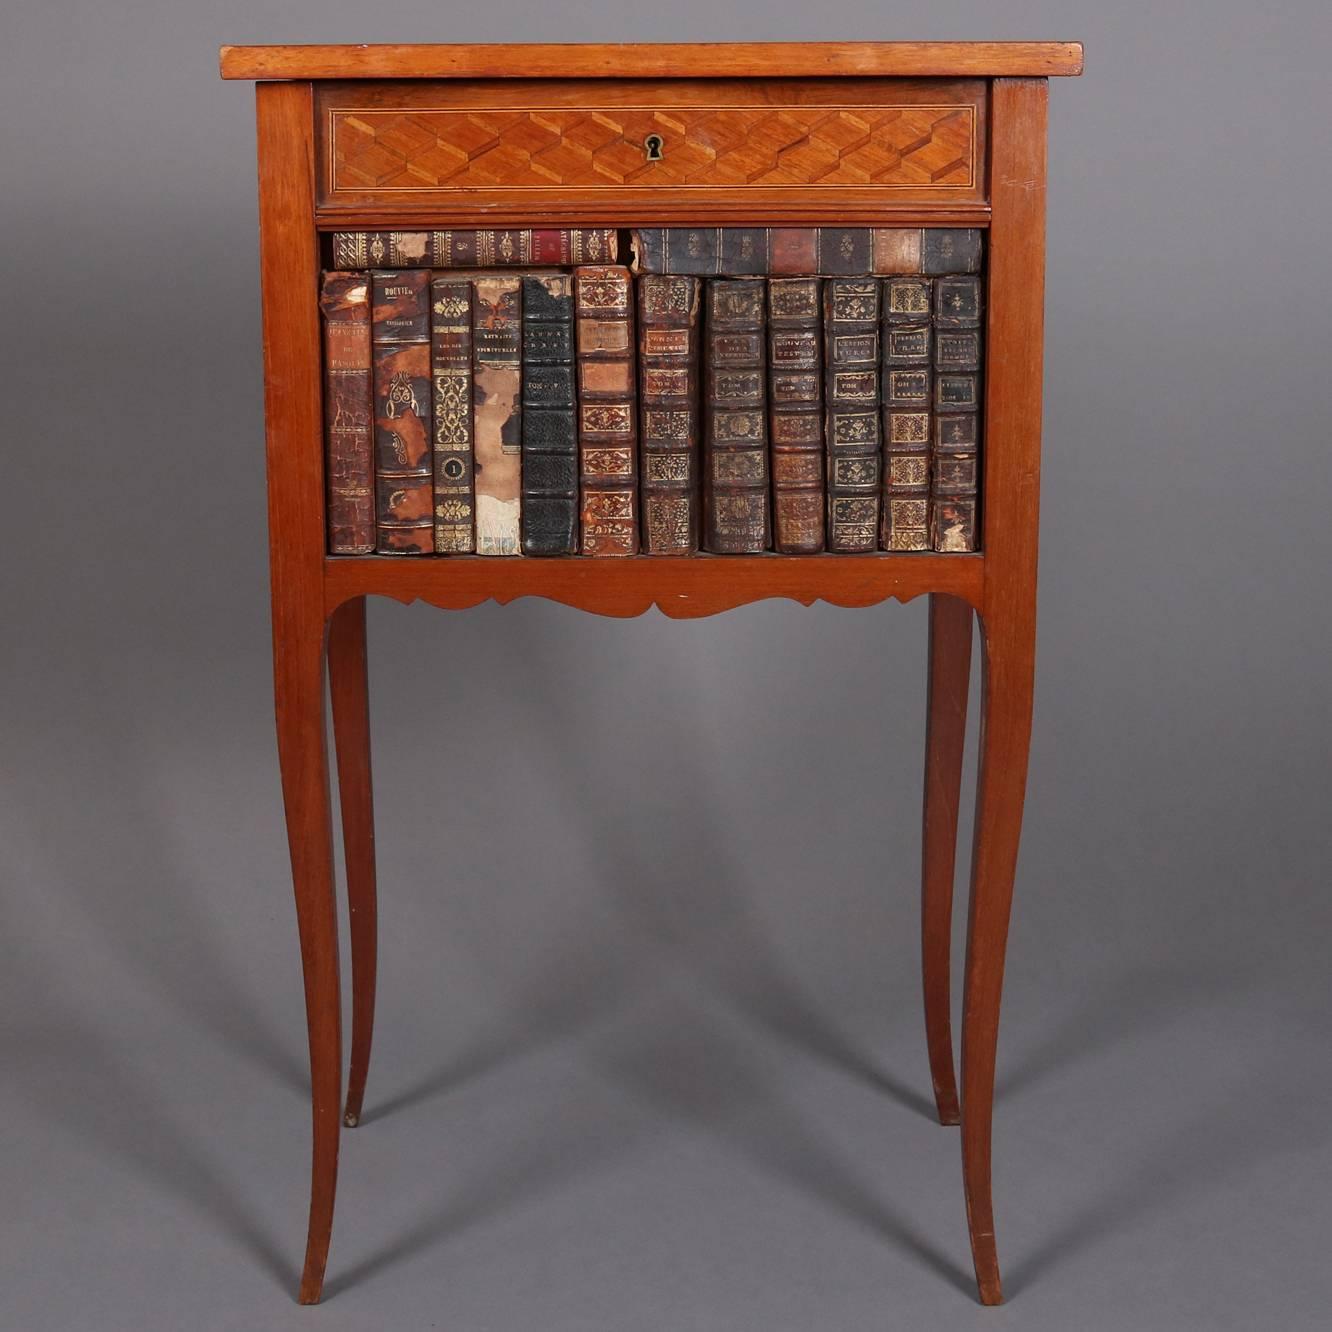 Antique French Louis XVI style satinwood parquetry inlaid table features faux book case front and parquetry inlaid top opening to interior compartment, seated on cabriole legs, 20th century.

Measures 31